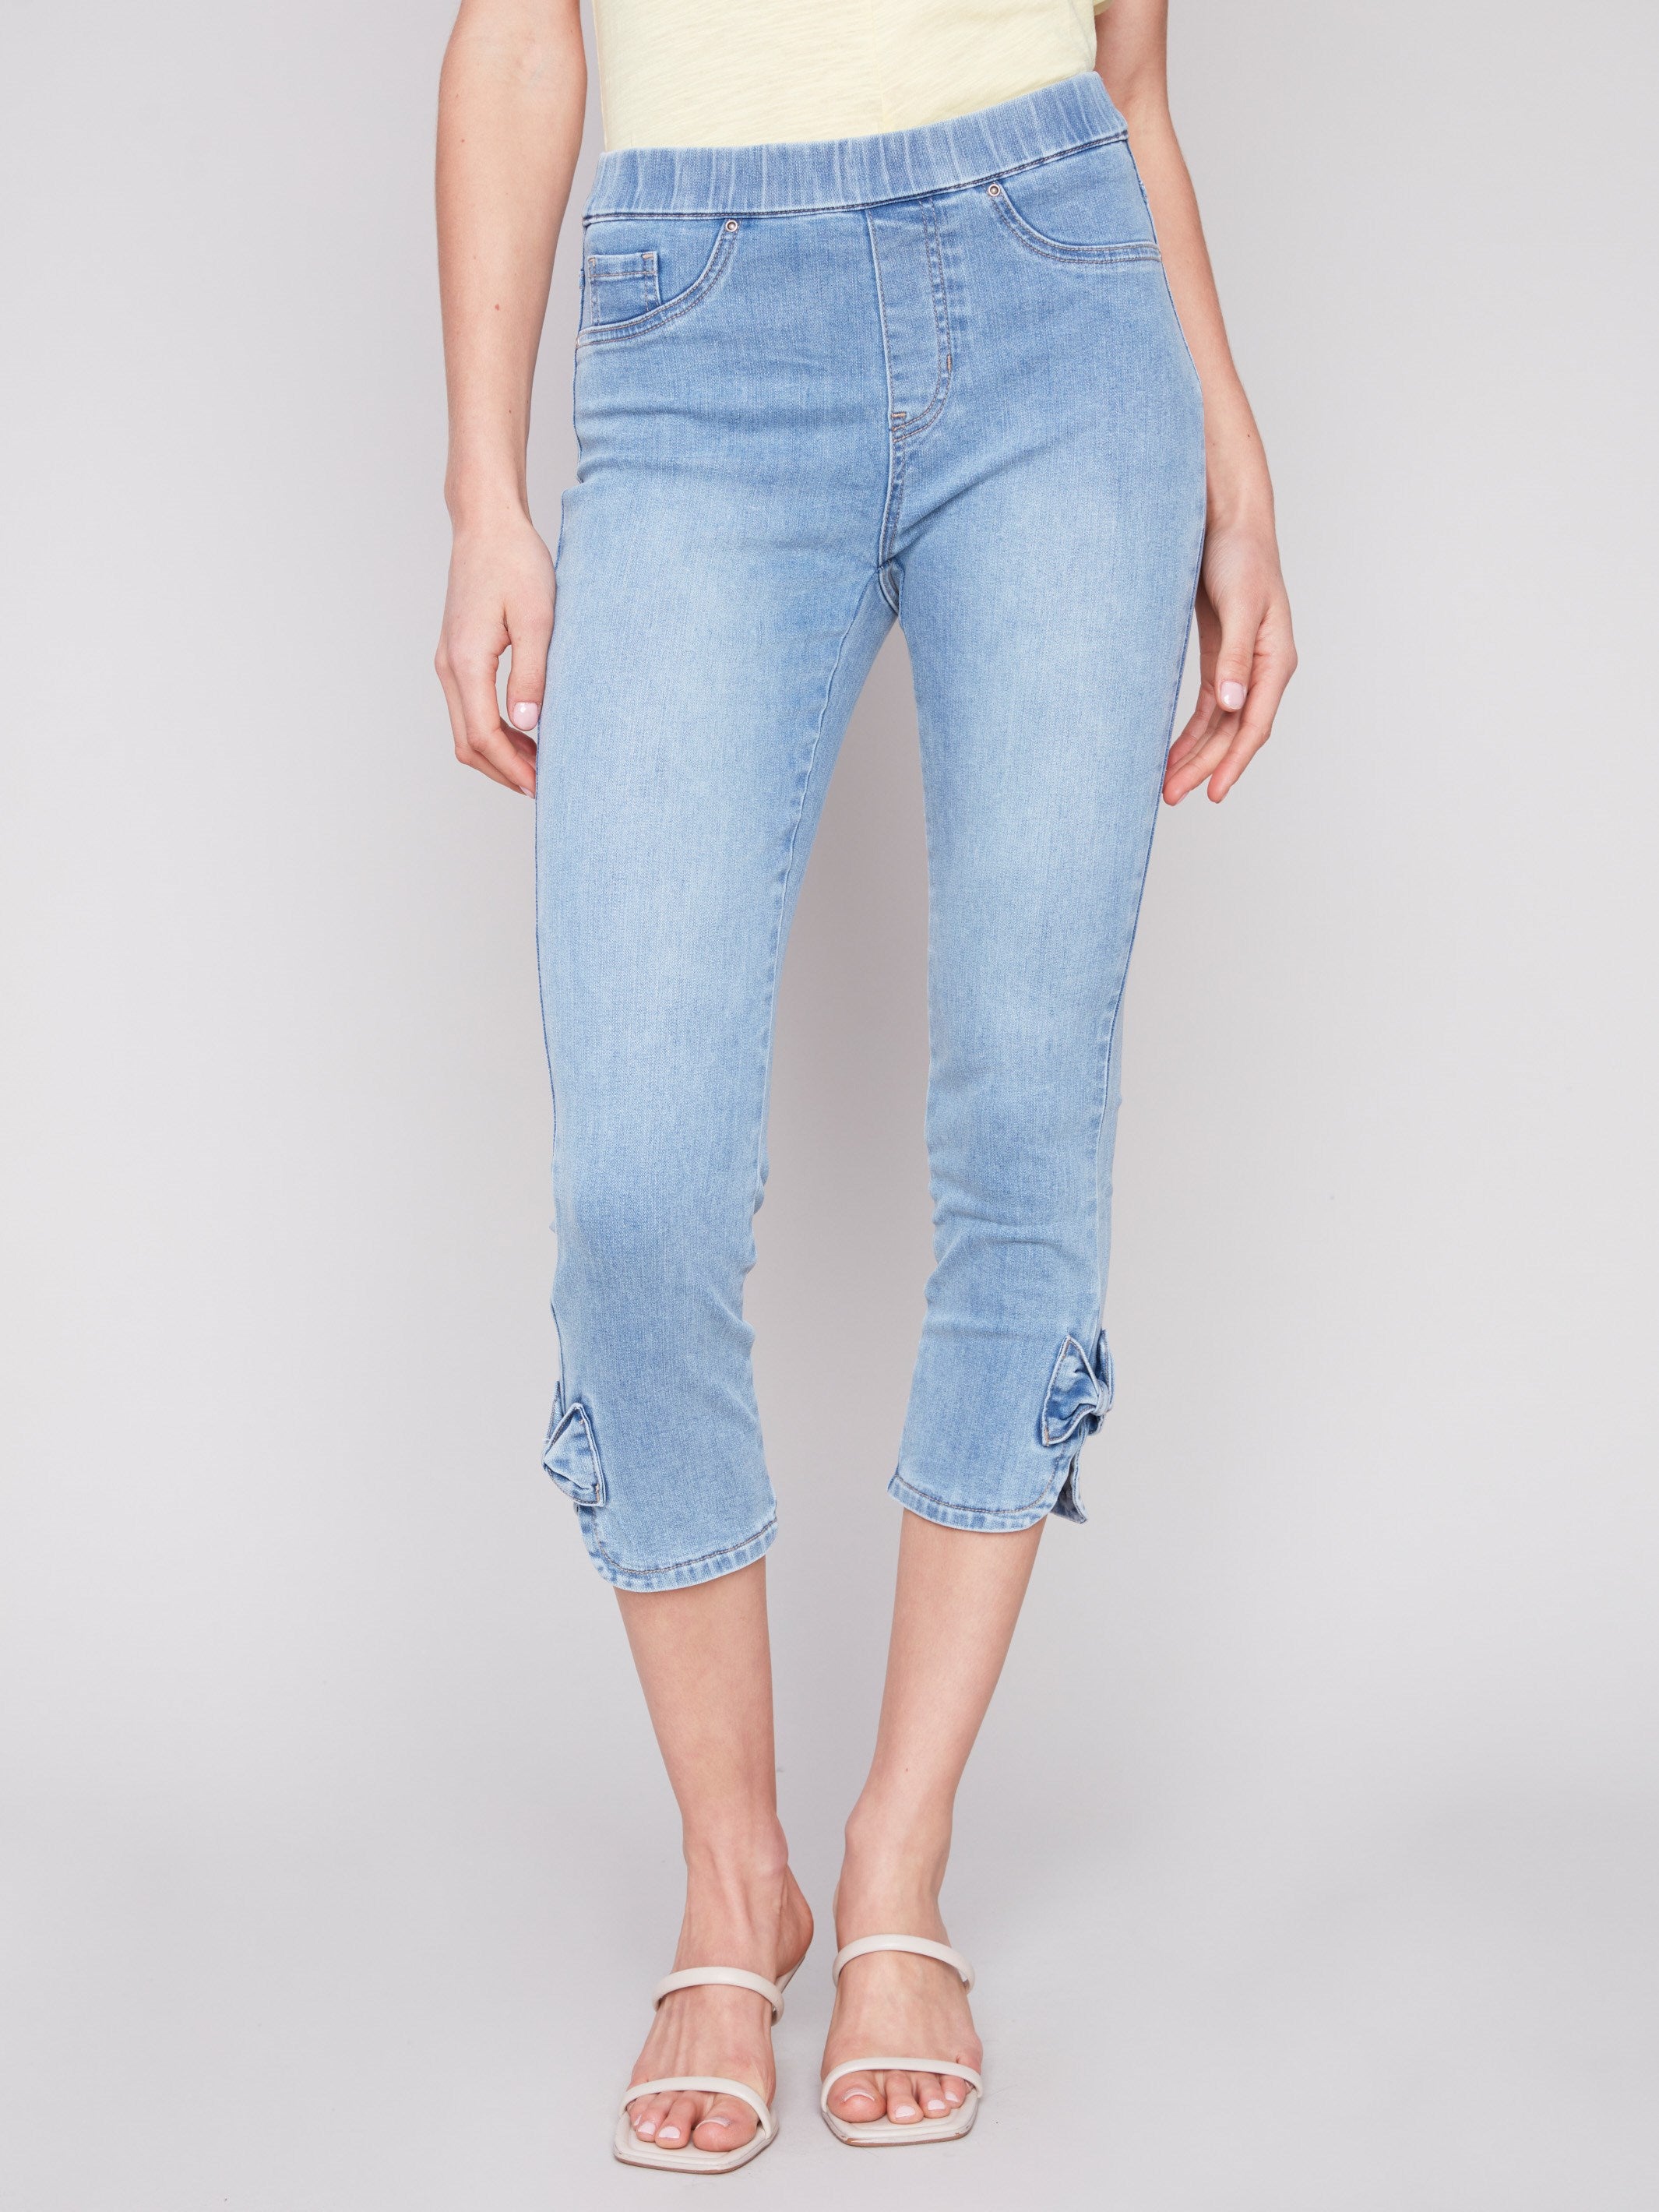 Charlie B Pull-On Jeans with Bow Detail - Light Blue - Image 4